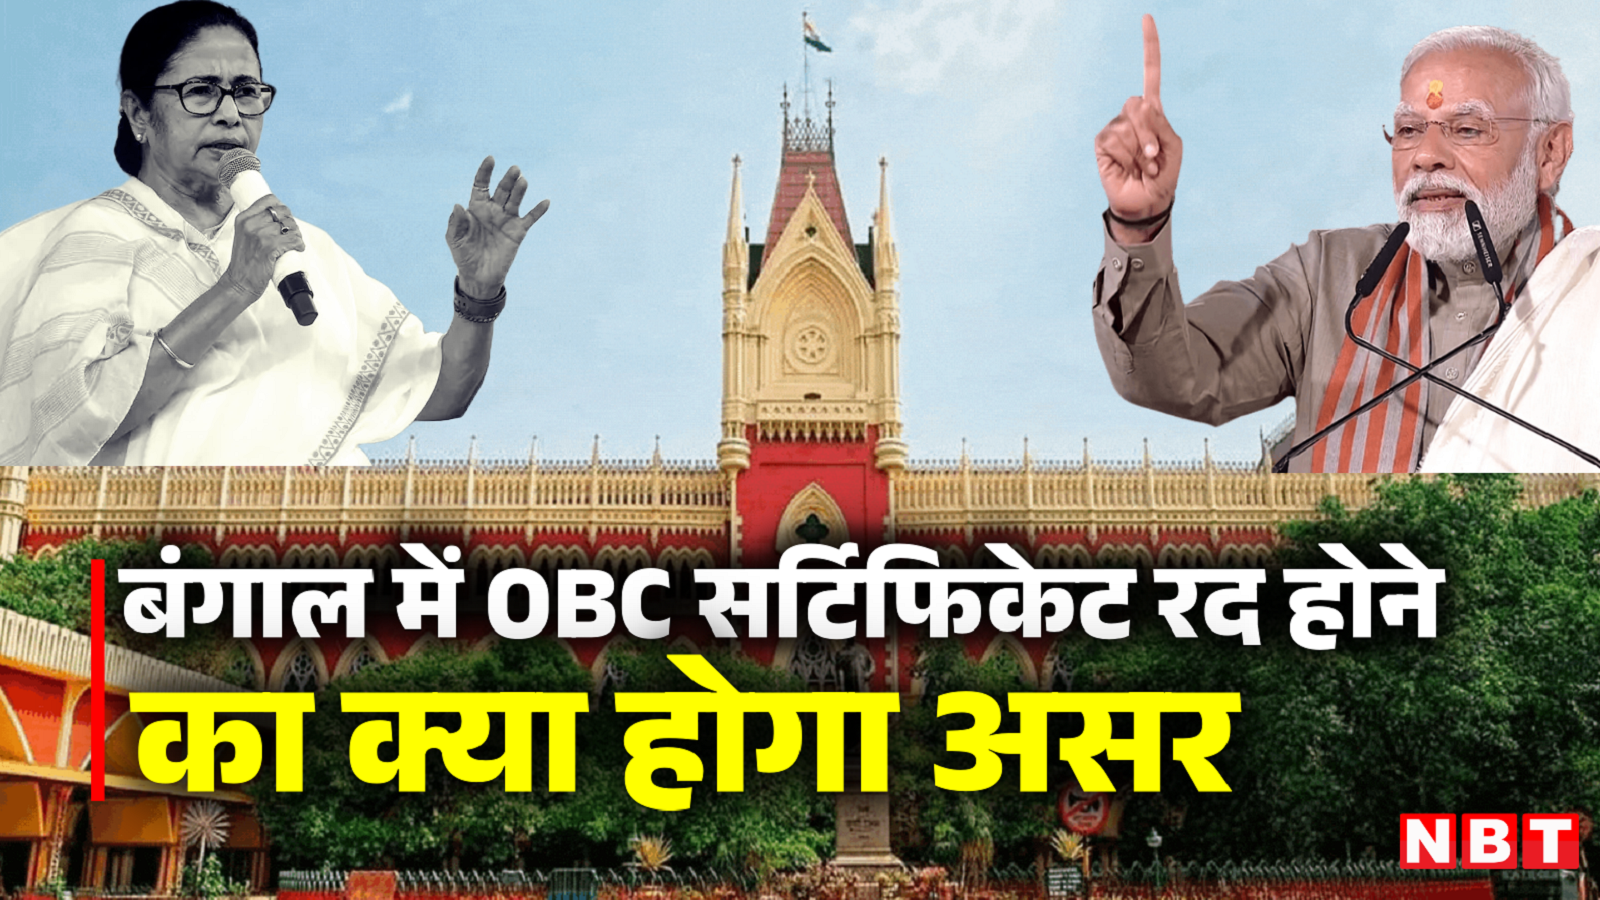 5 lakh OBC certificates will be canceled in Bengal, what will be the impact of Calcutta High Court's order on politics?